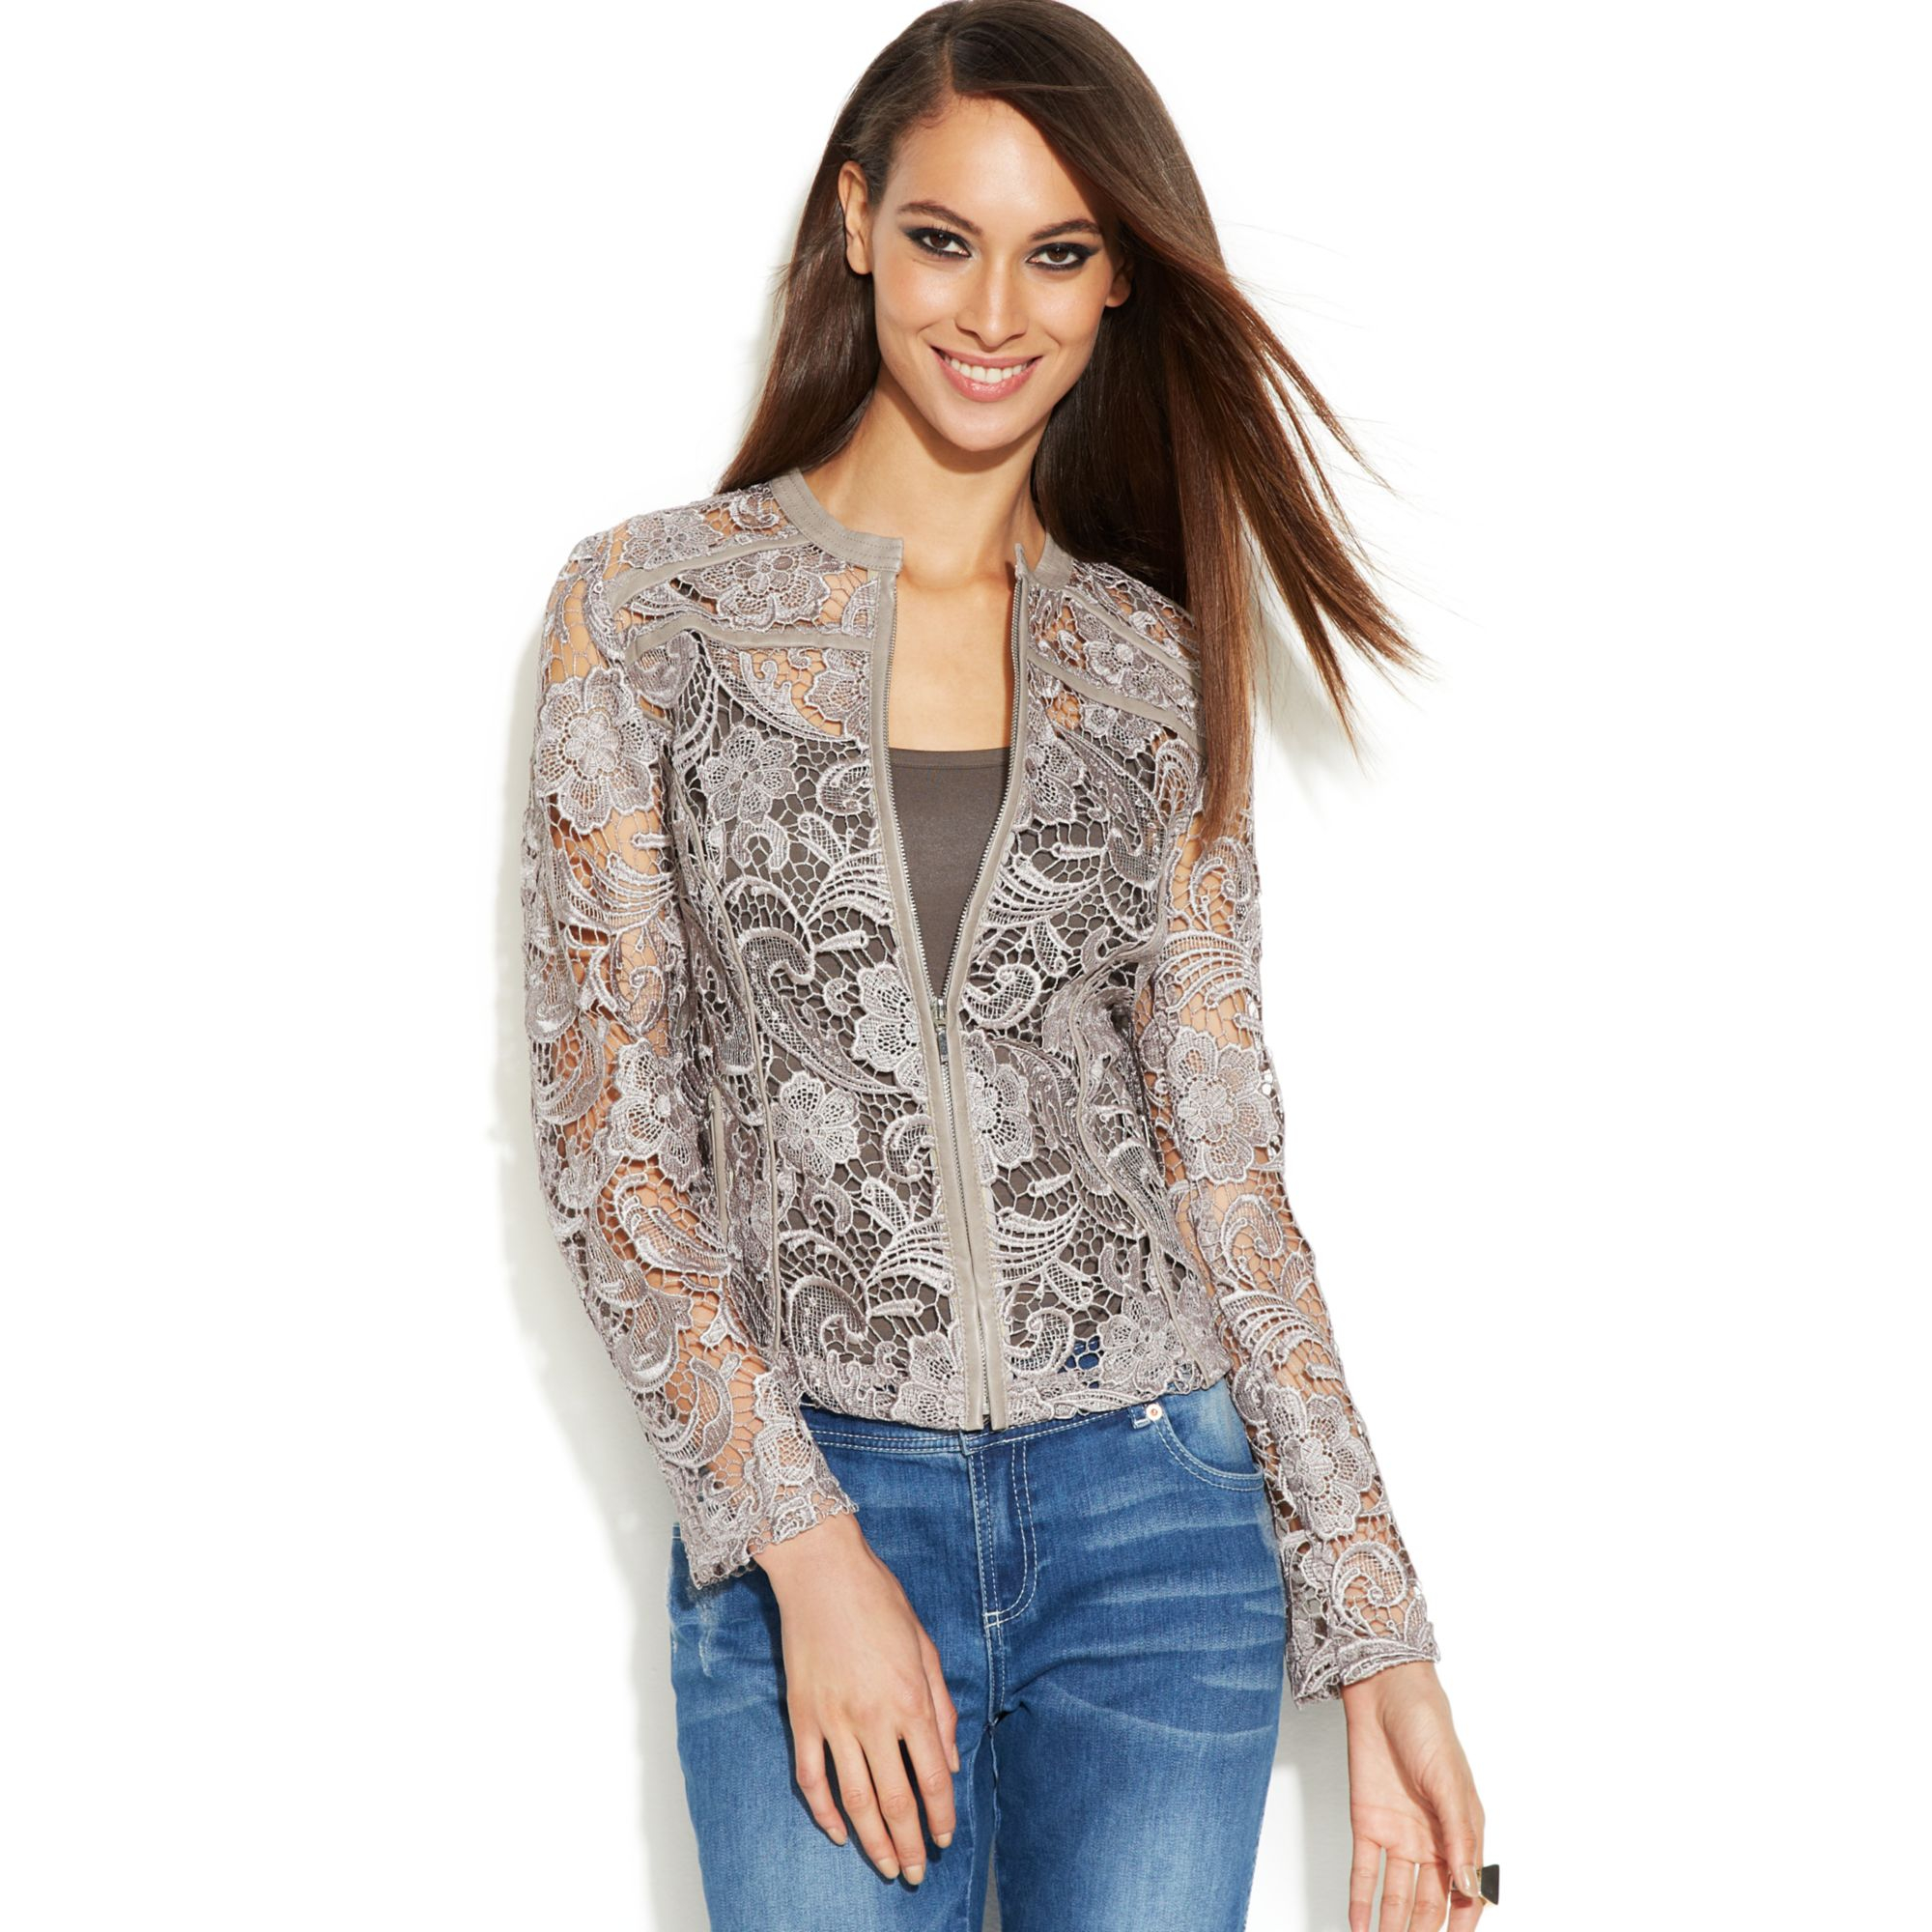 Lyst - Inc International Concepts Fauxleathertrim Lace Jacket in Gray